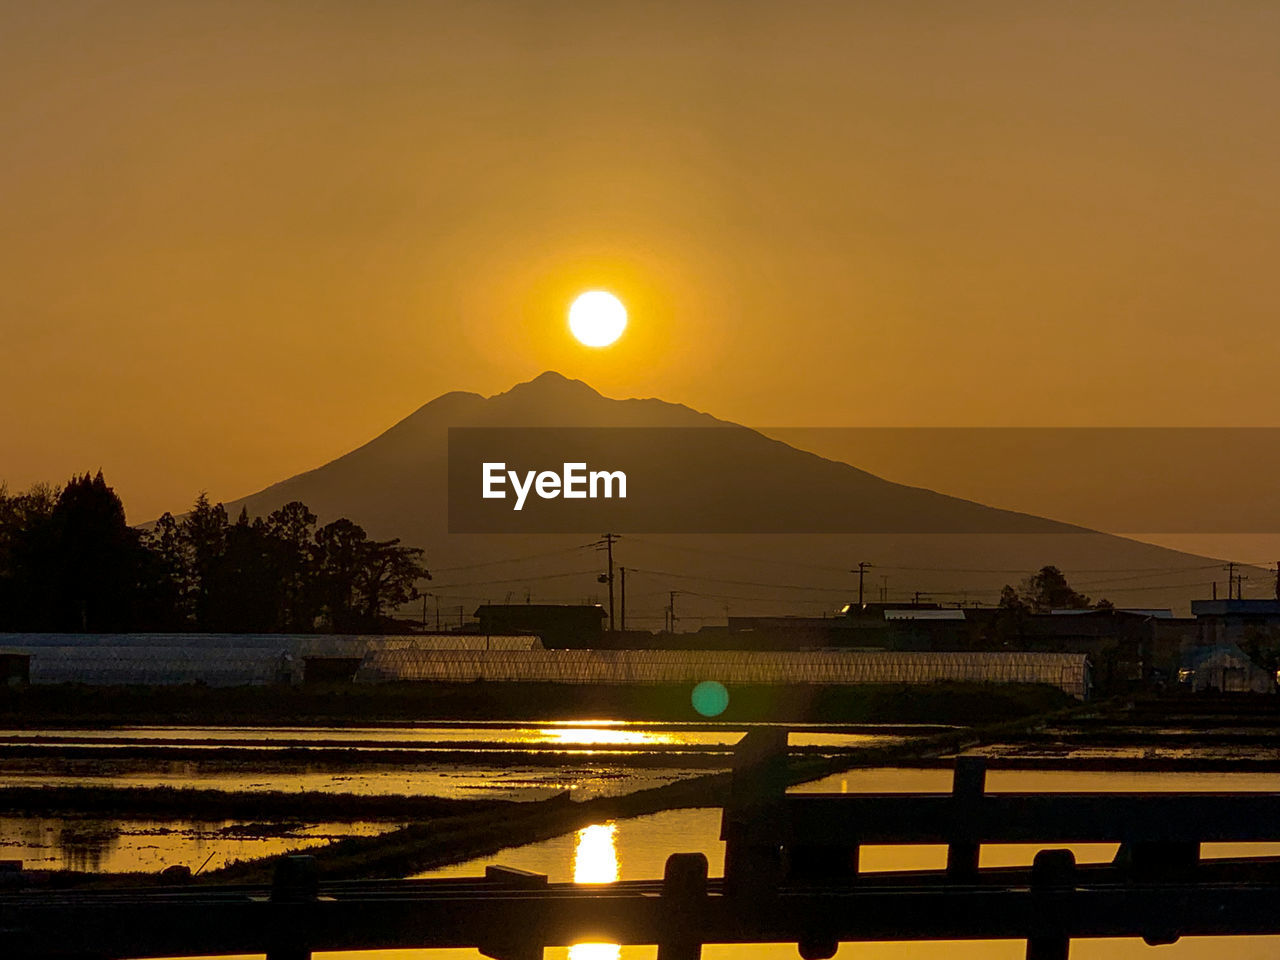 The setting sun sets on mt. iwaki and the rice fields shine